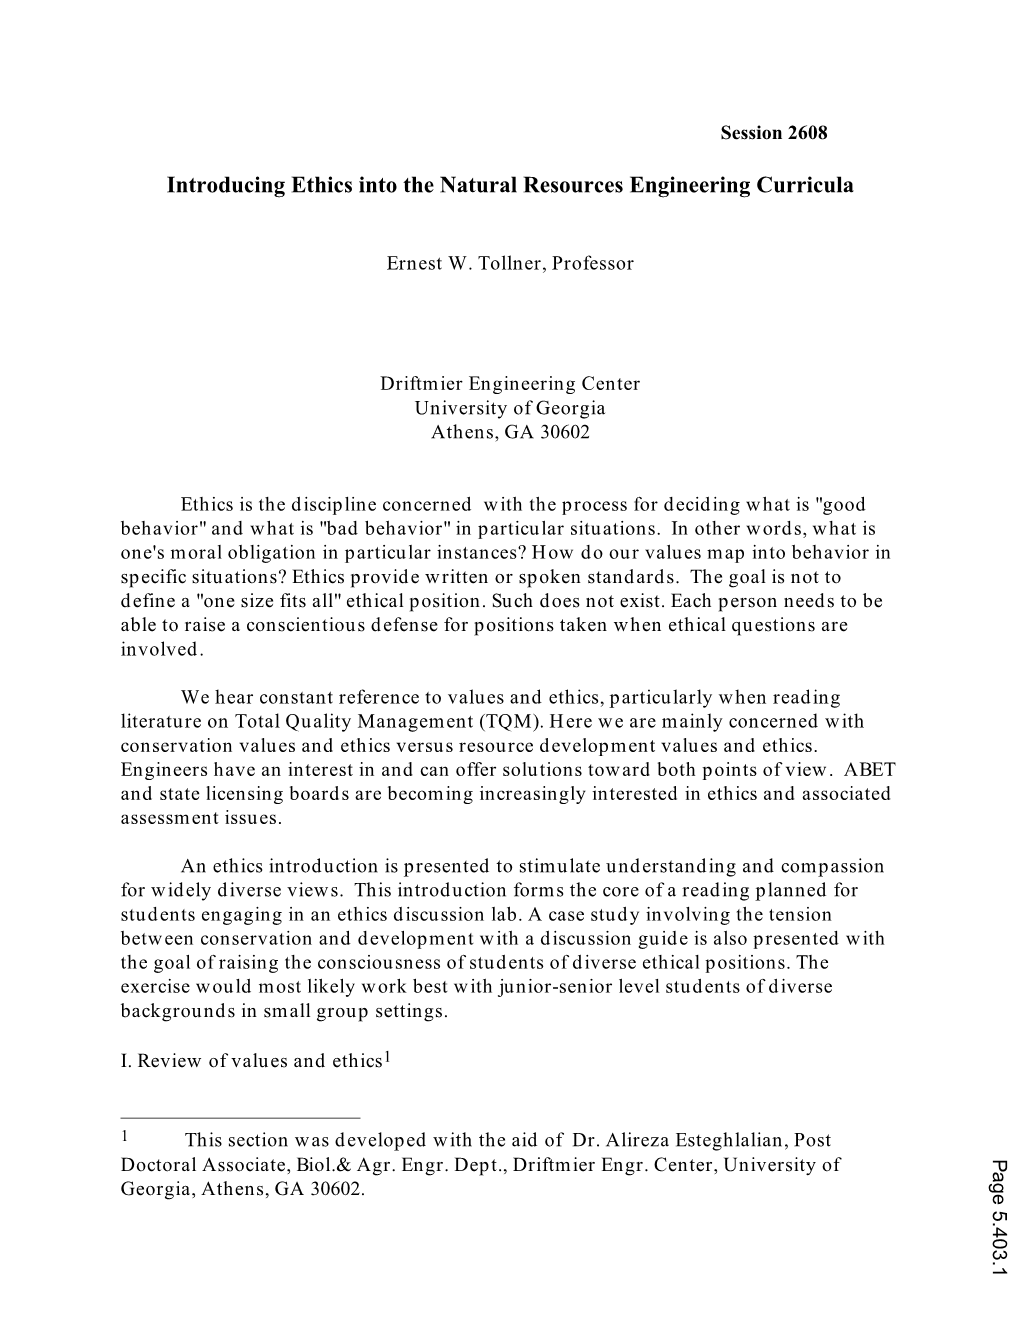 Introducing Ethics Into the Natural Resources Engineering Curricula